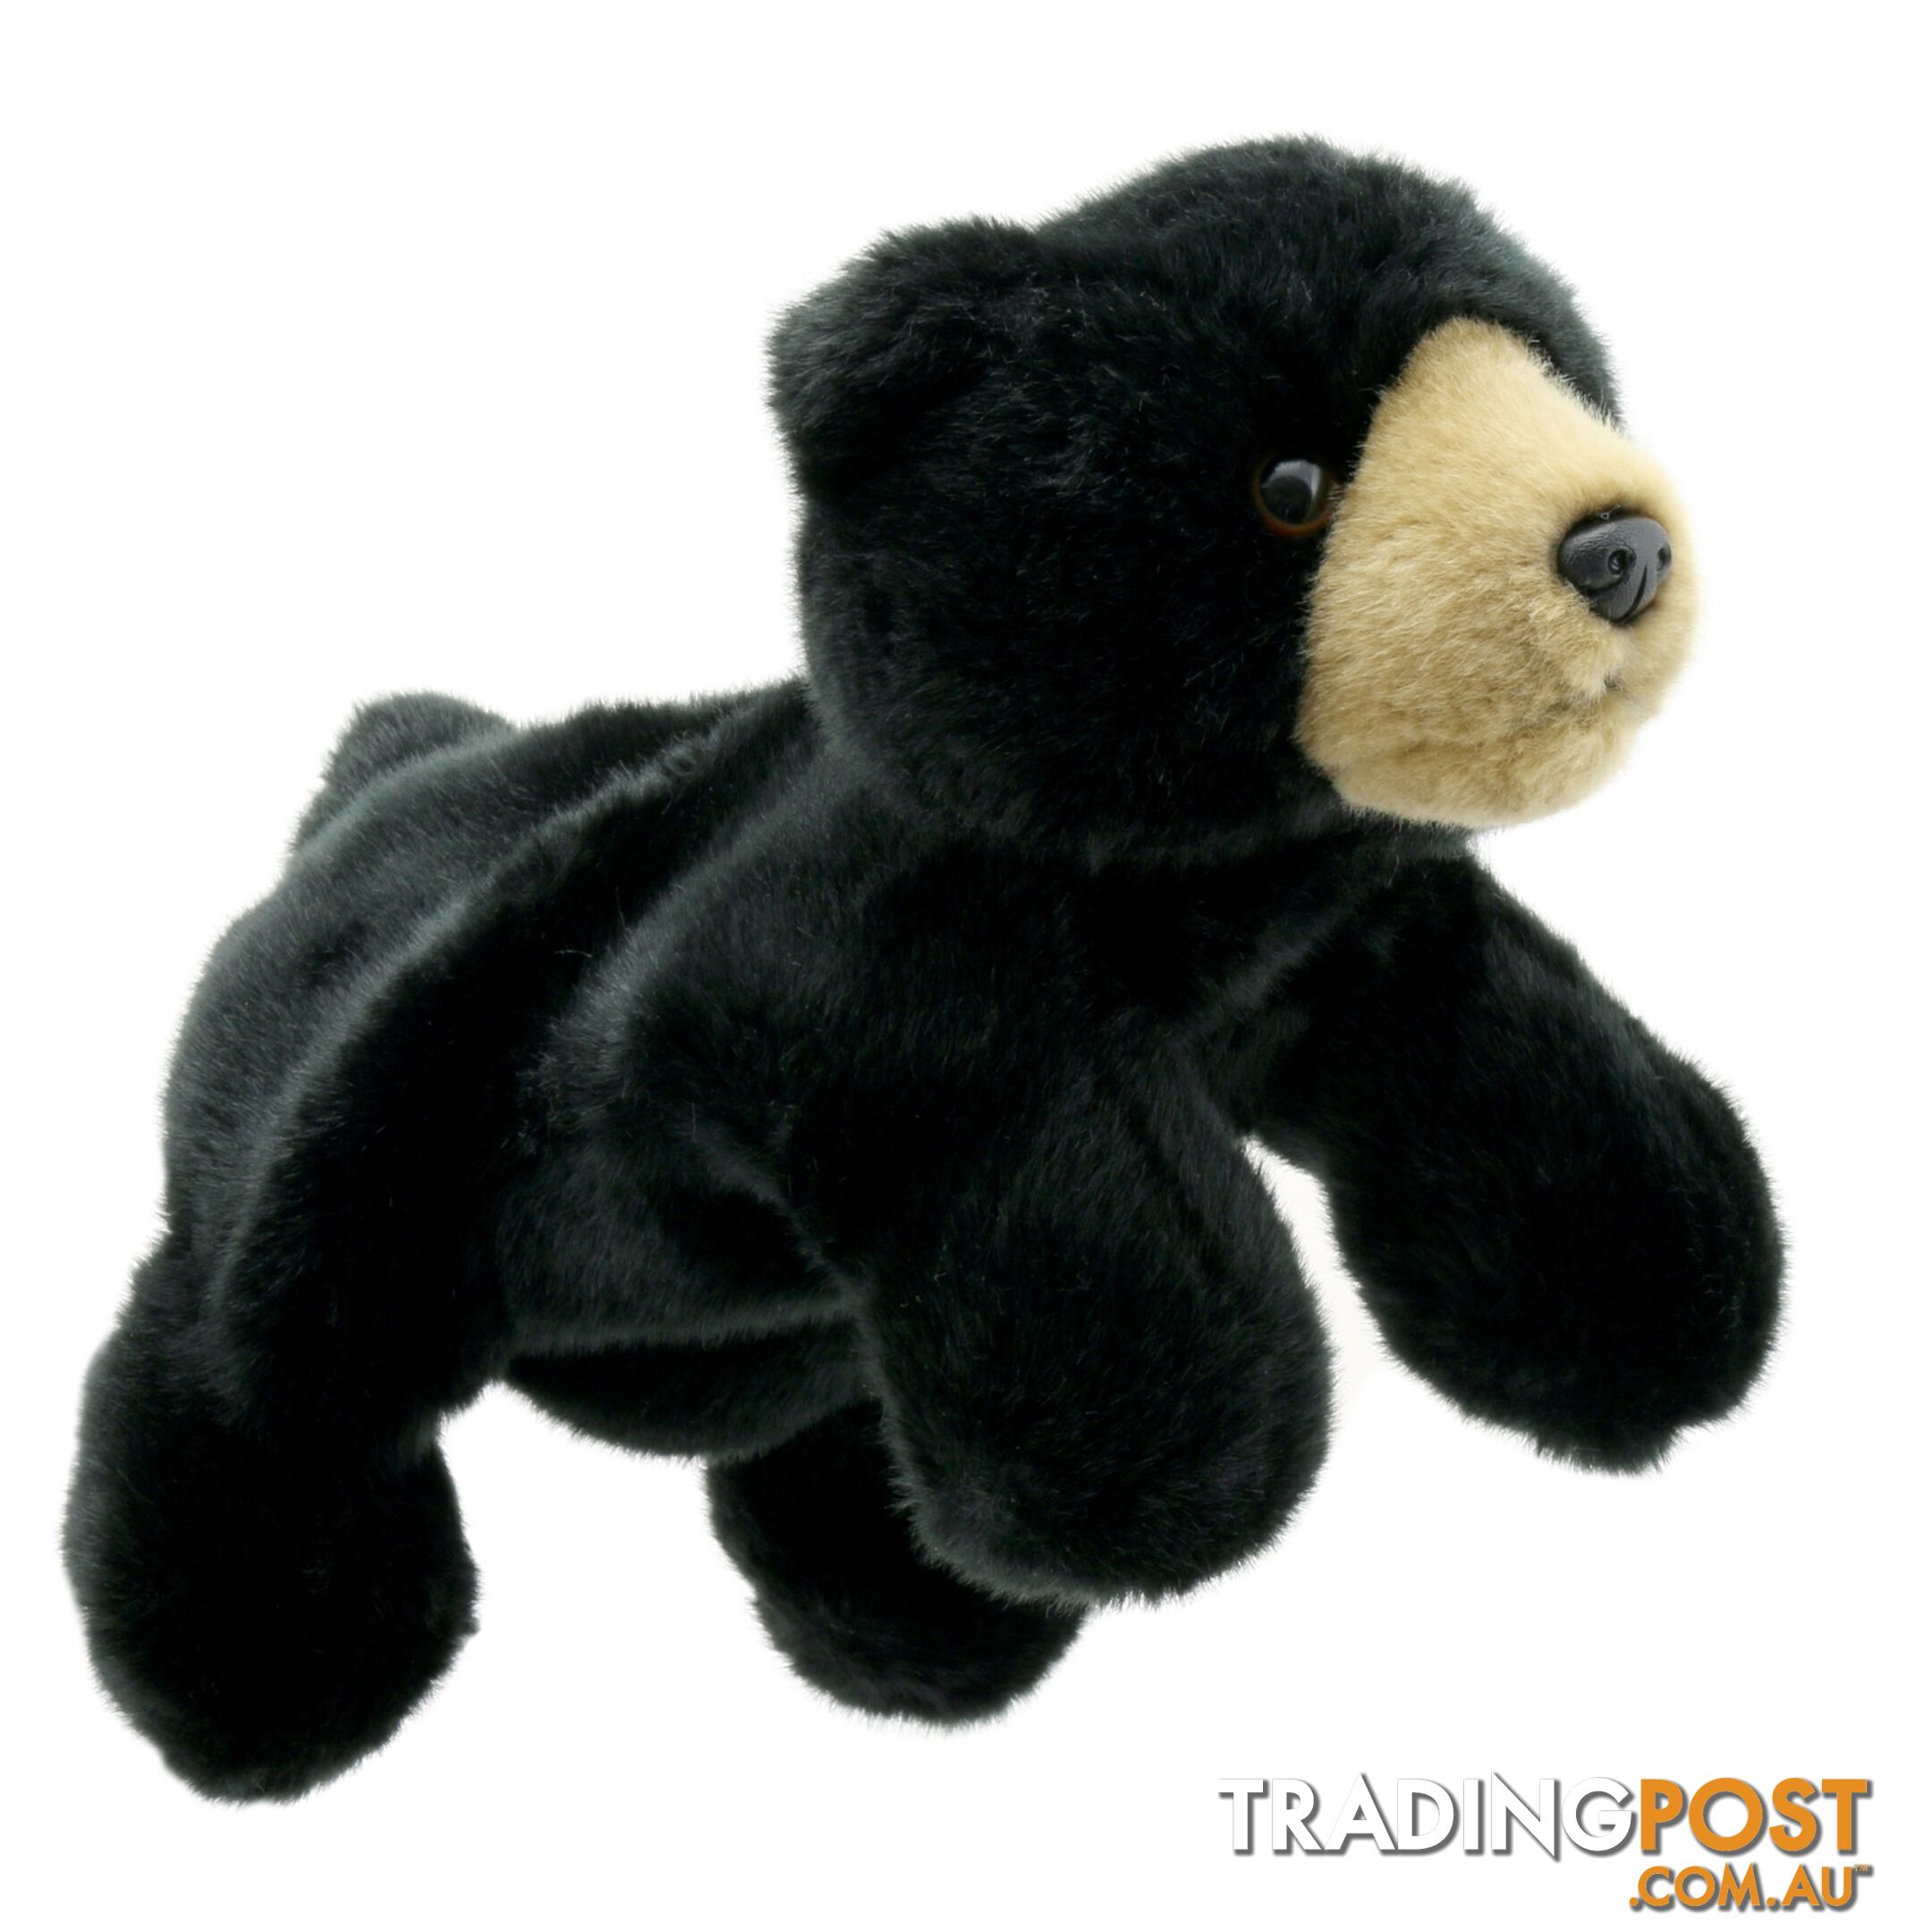 Bear - Black - FULL Bodied Hand - The Puppet Company